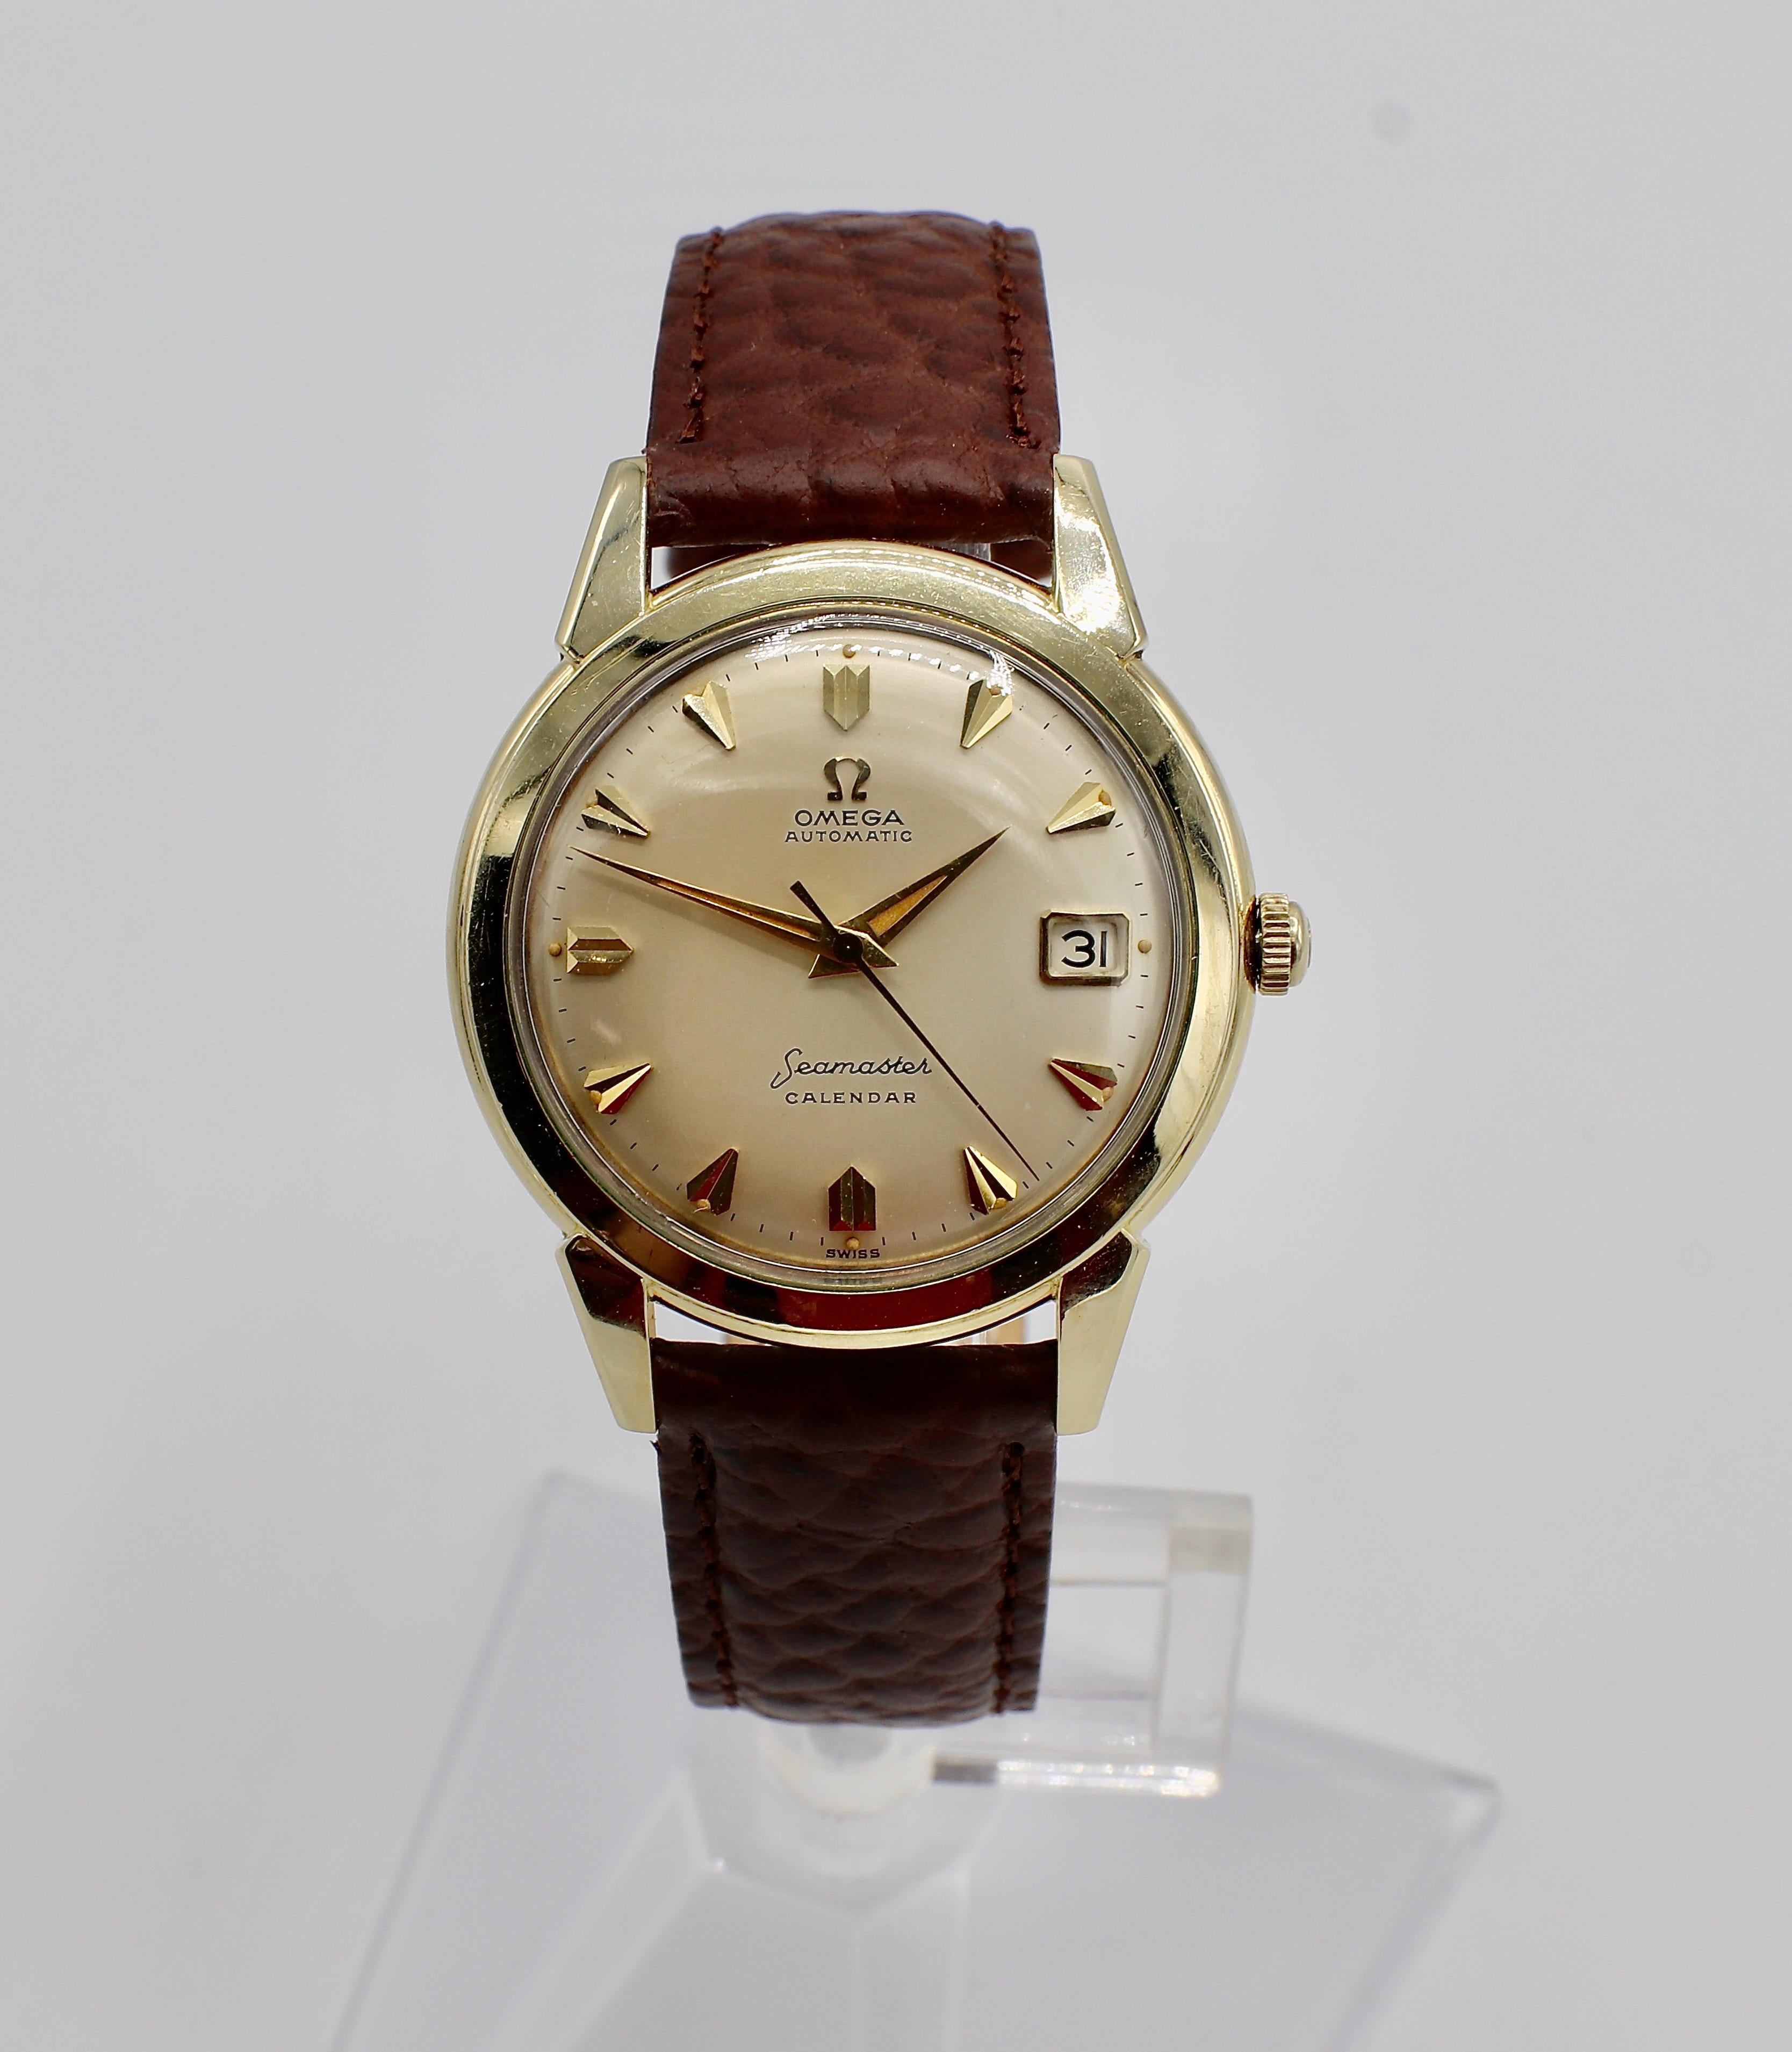 Vintage Omega Seamaster Automatic Calendar Gold Filled Watch on Brown Leather Speidel Strap 

Metal: 14K Gold Filled 
Case: 35MM
Dial: Champaign
Crystal: Acrylic 
Strap: Brown leather Speidel 
Movement: Automatic
